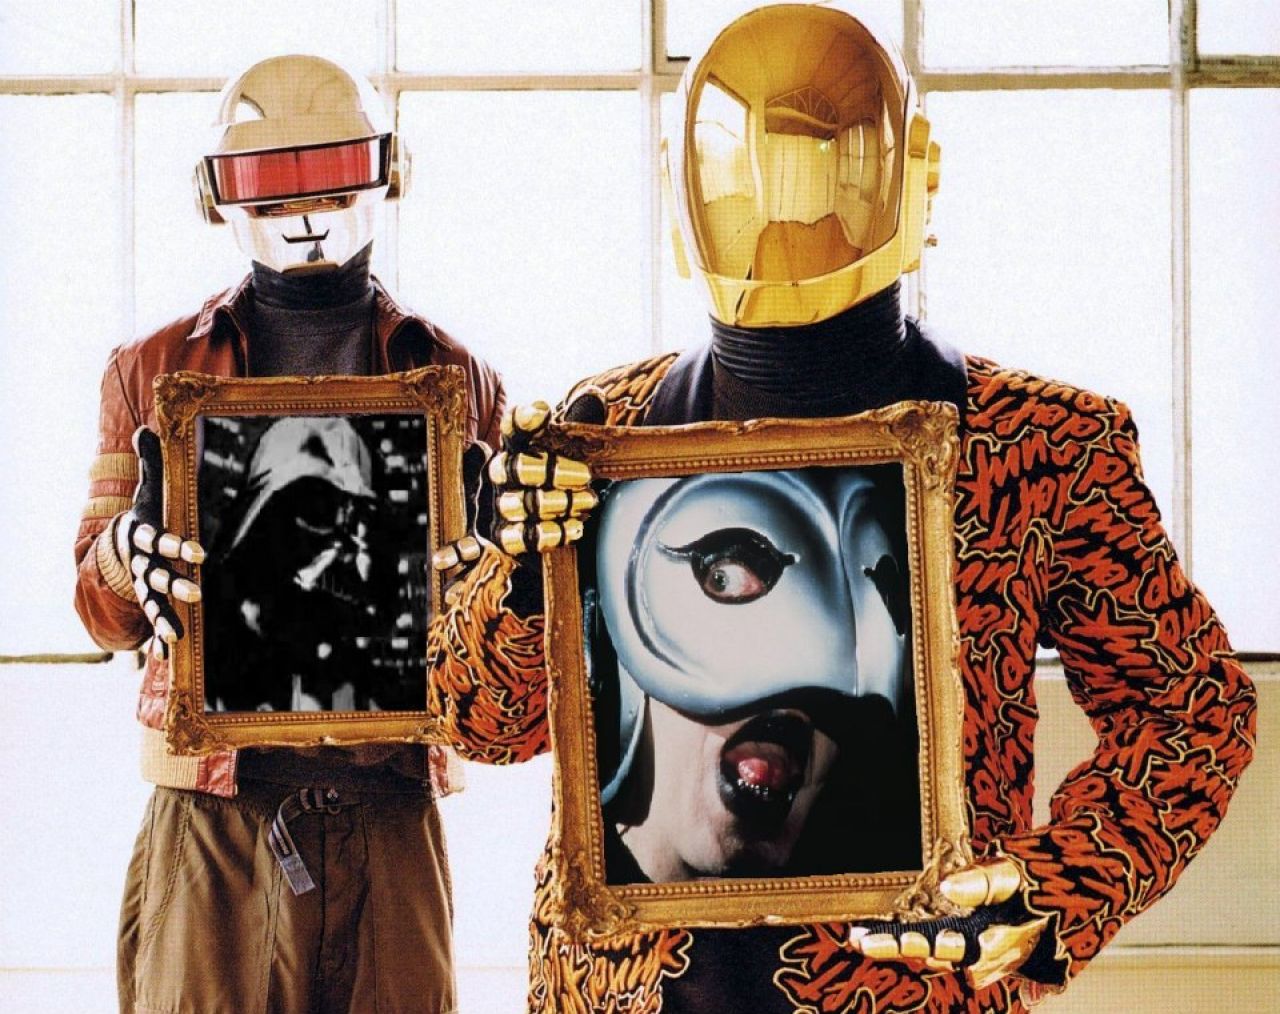 How Daft Punk's robots were crafted, in the words of their